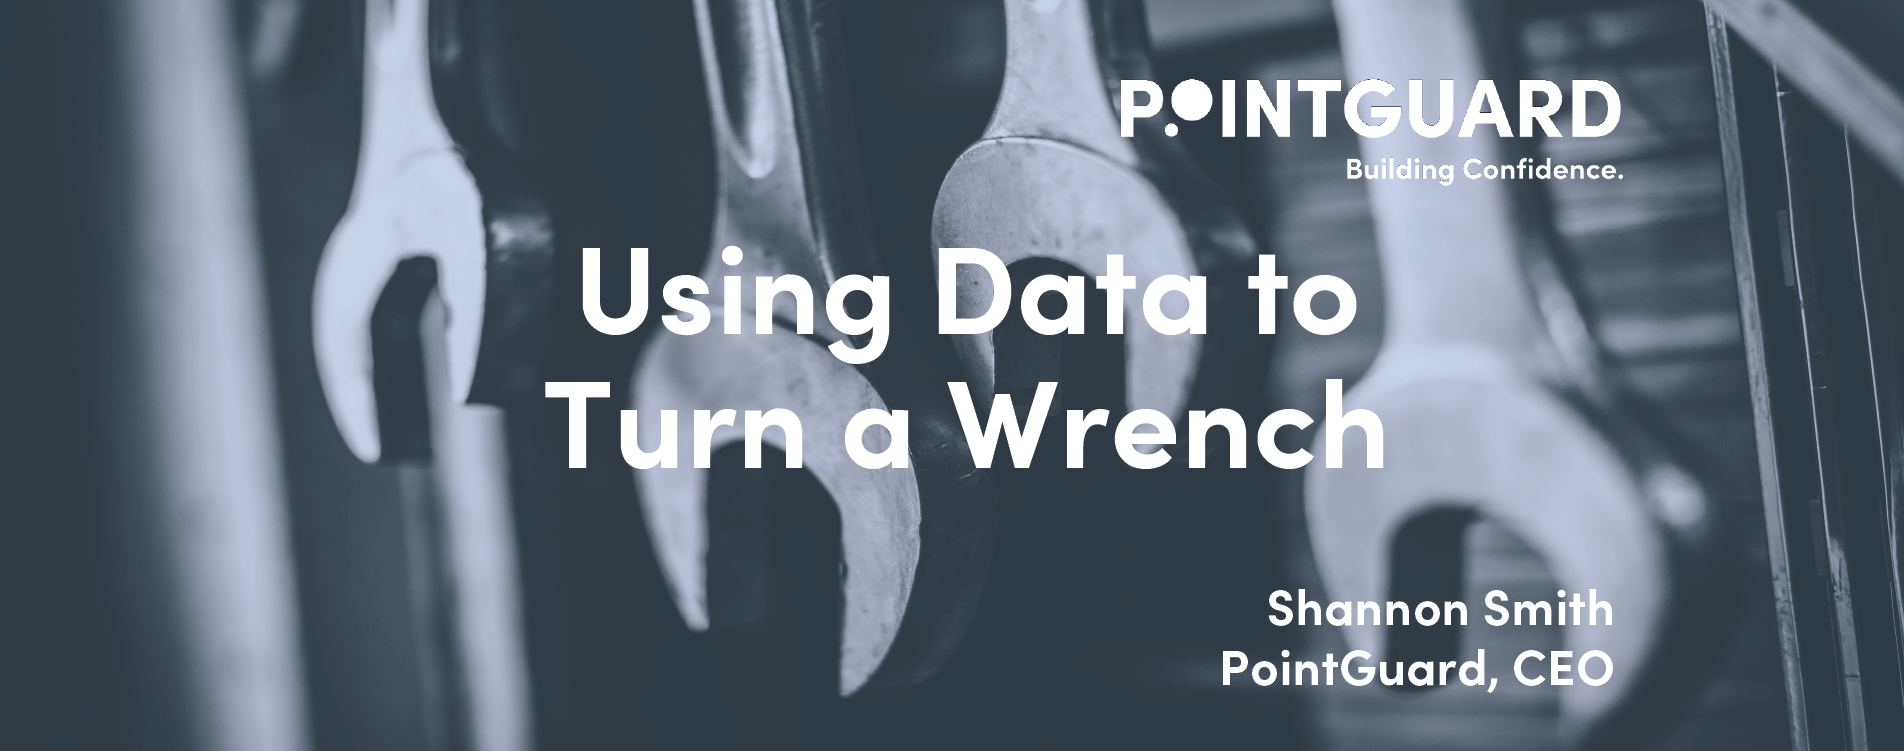 Use Data to Turn a Wrench